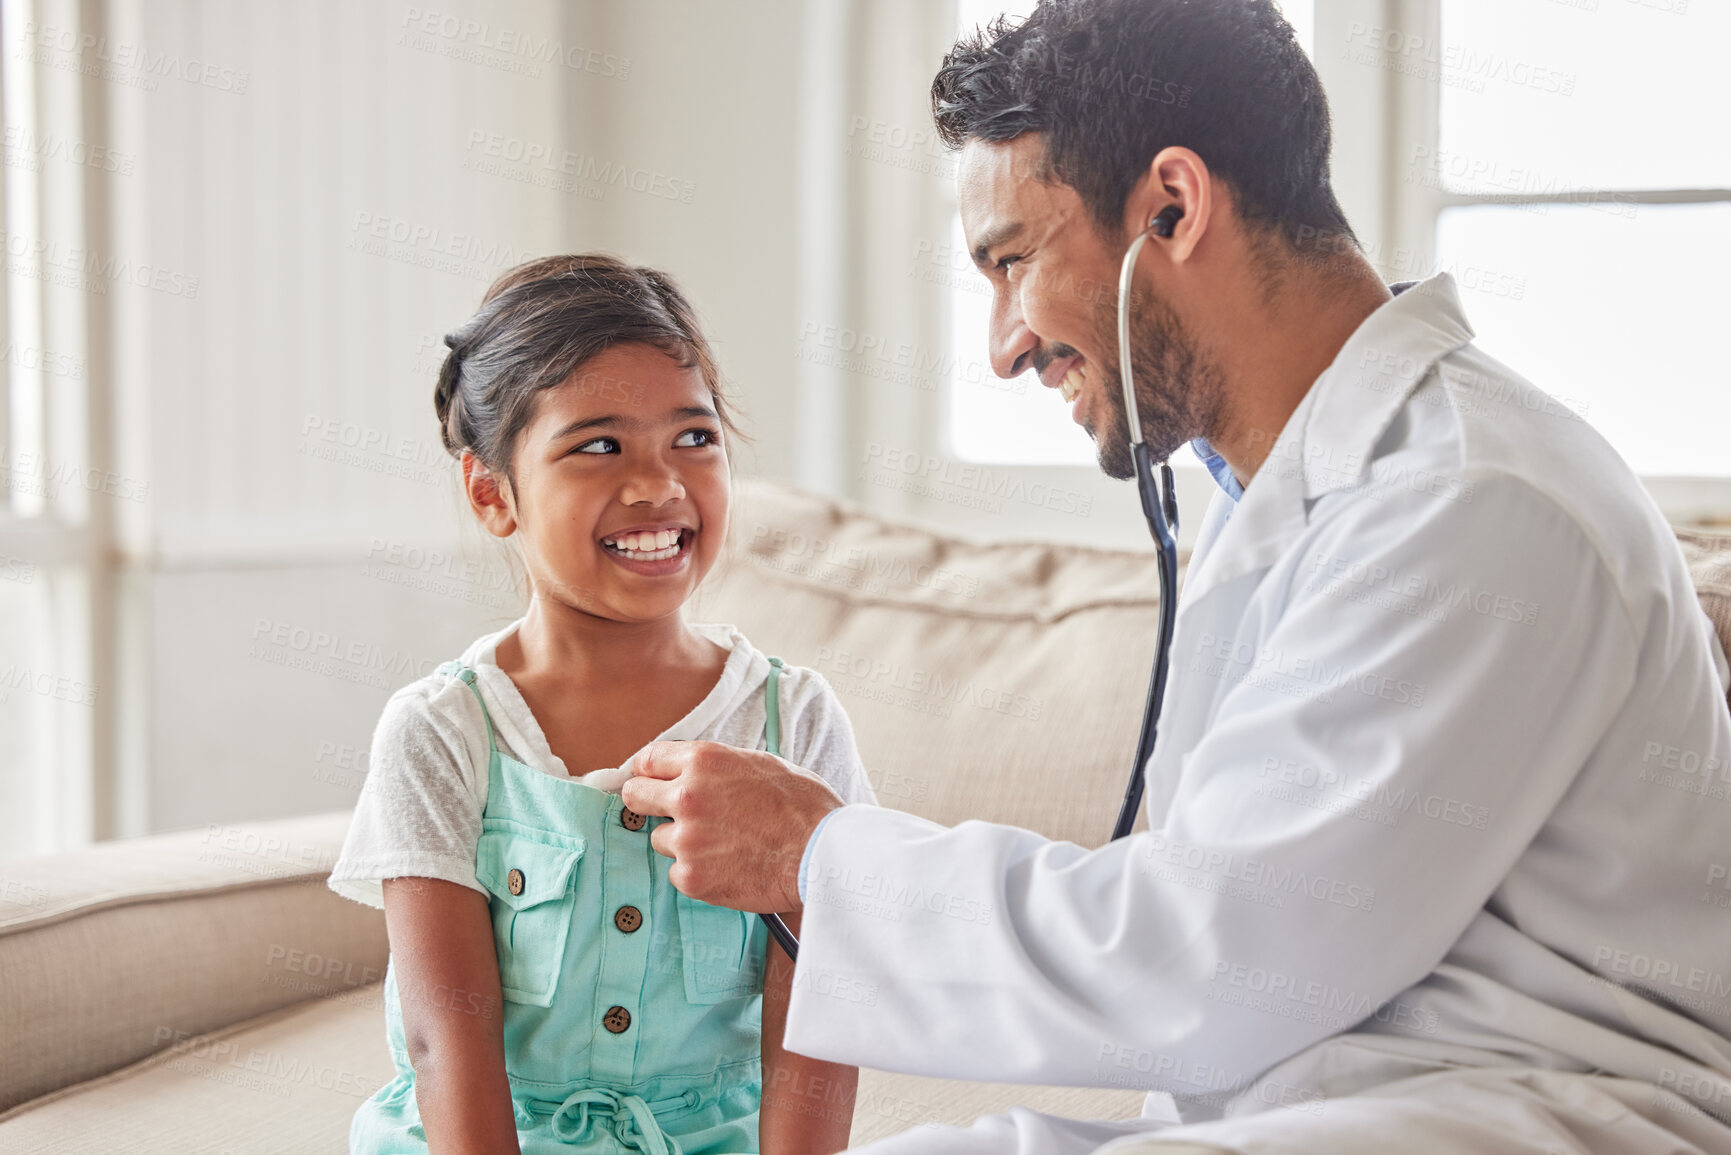 Buy stock photo Young handsome smiling doctor using a stethoscope to listen to a sick little girls heartbeat during a house call checkup at home